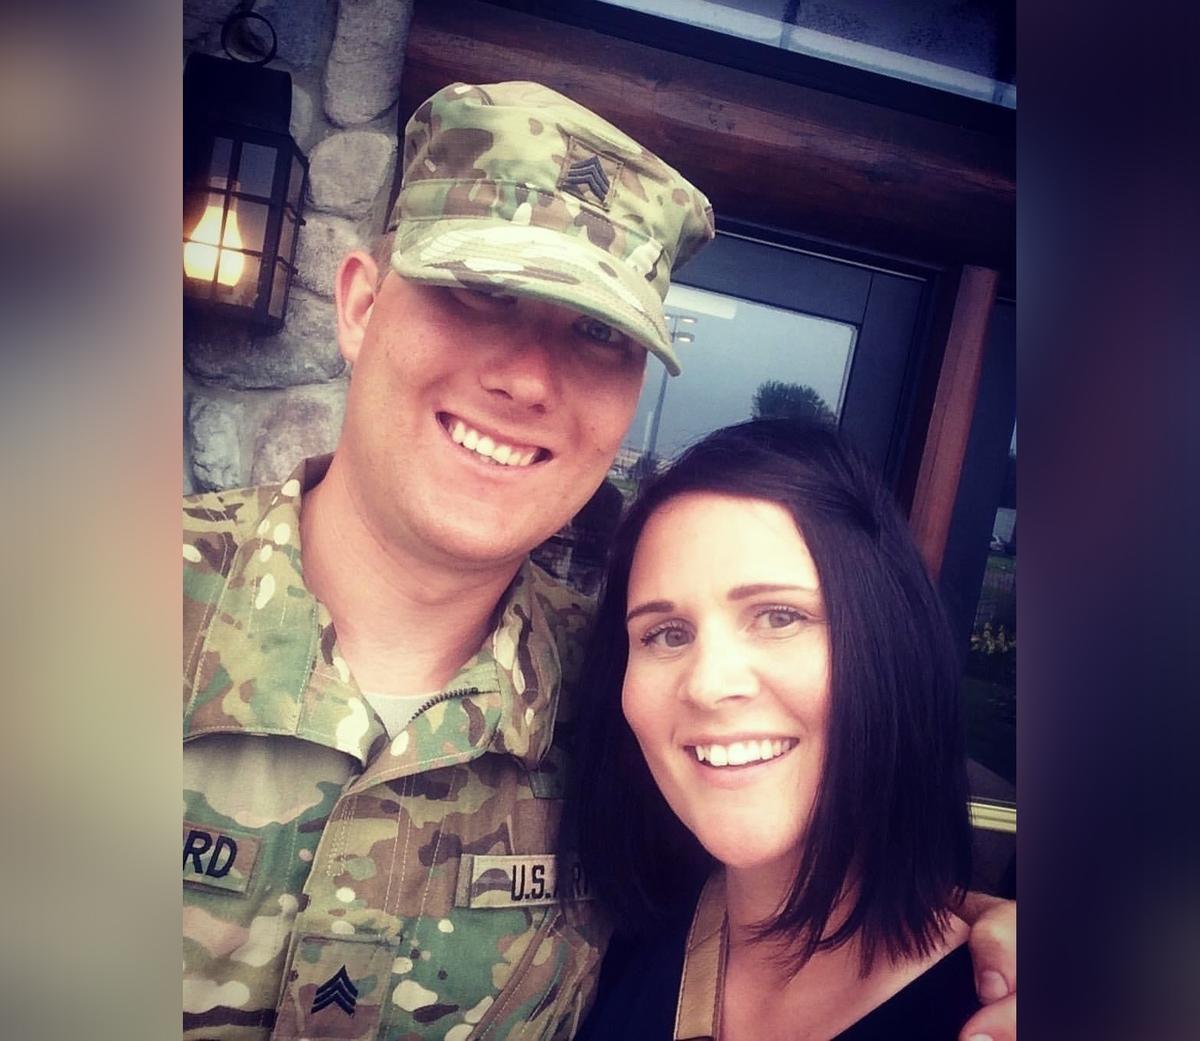 Sgt. Brandon Stafford poses for a picture with his big sister Melissa Hjelle. (Courtesy of Melissa Hjelle via <a href="https://www.dvidshub.net/image/6639454/soldiers-shave-their-heads-support-battle-buddys-sister-who-recovering-cancer">DVIDSHUB</a>)